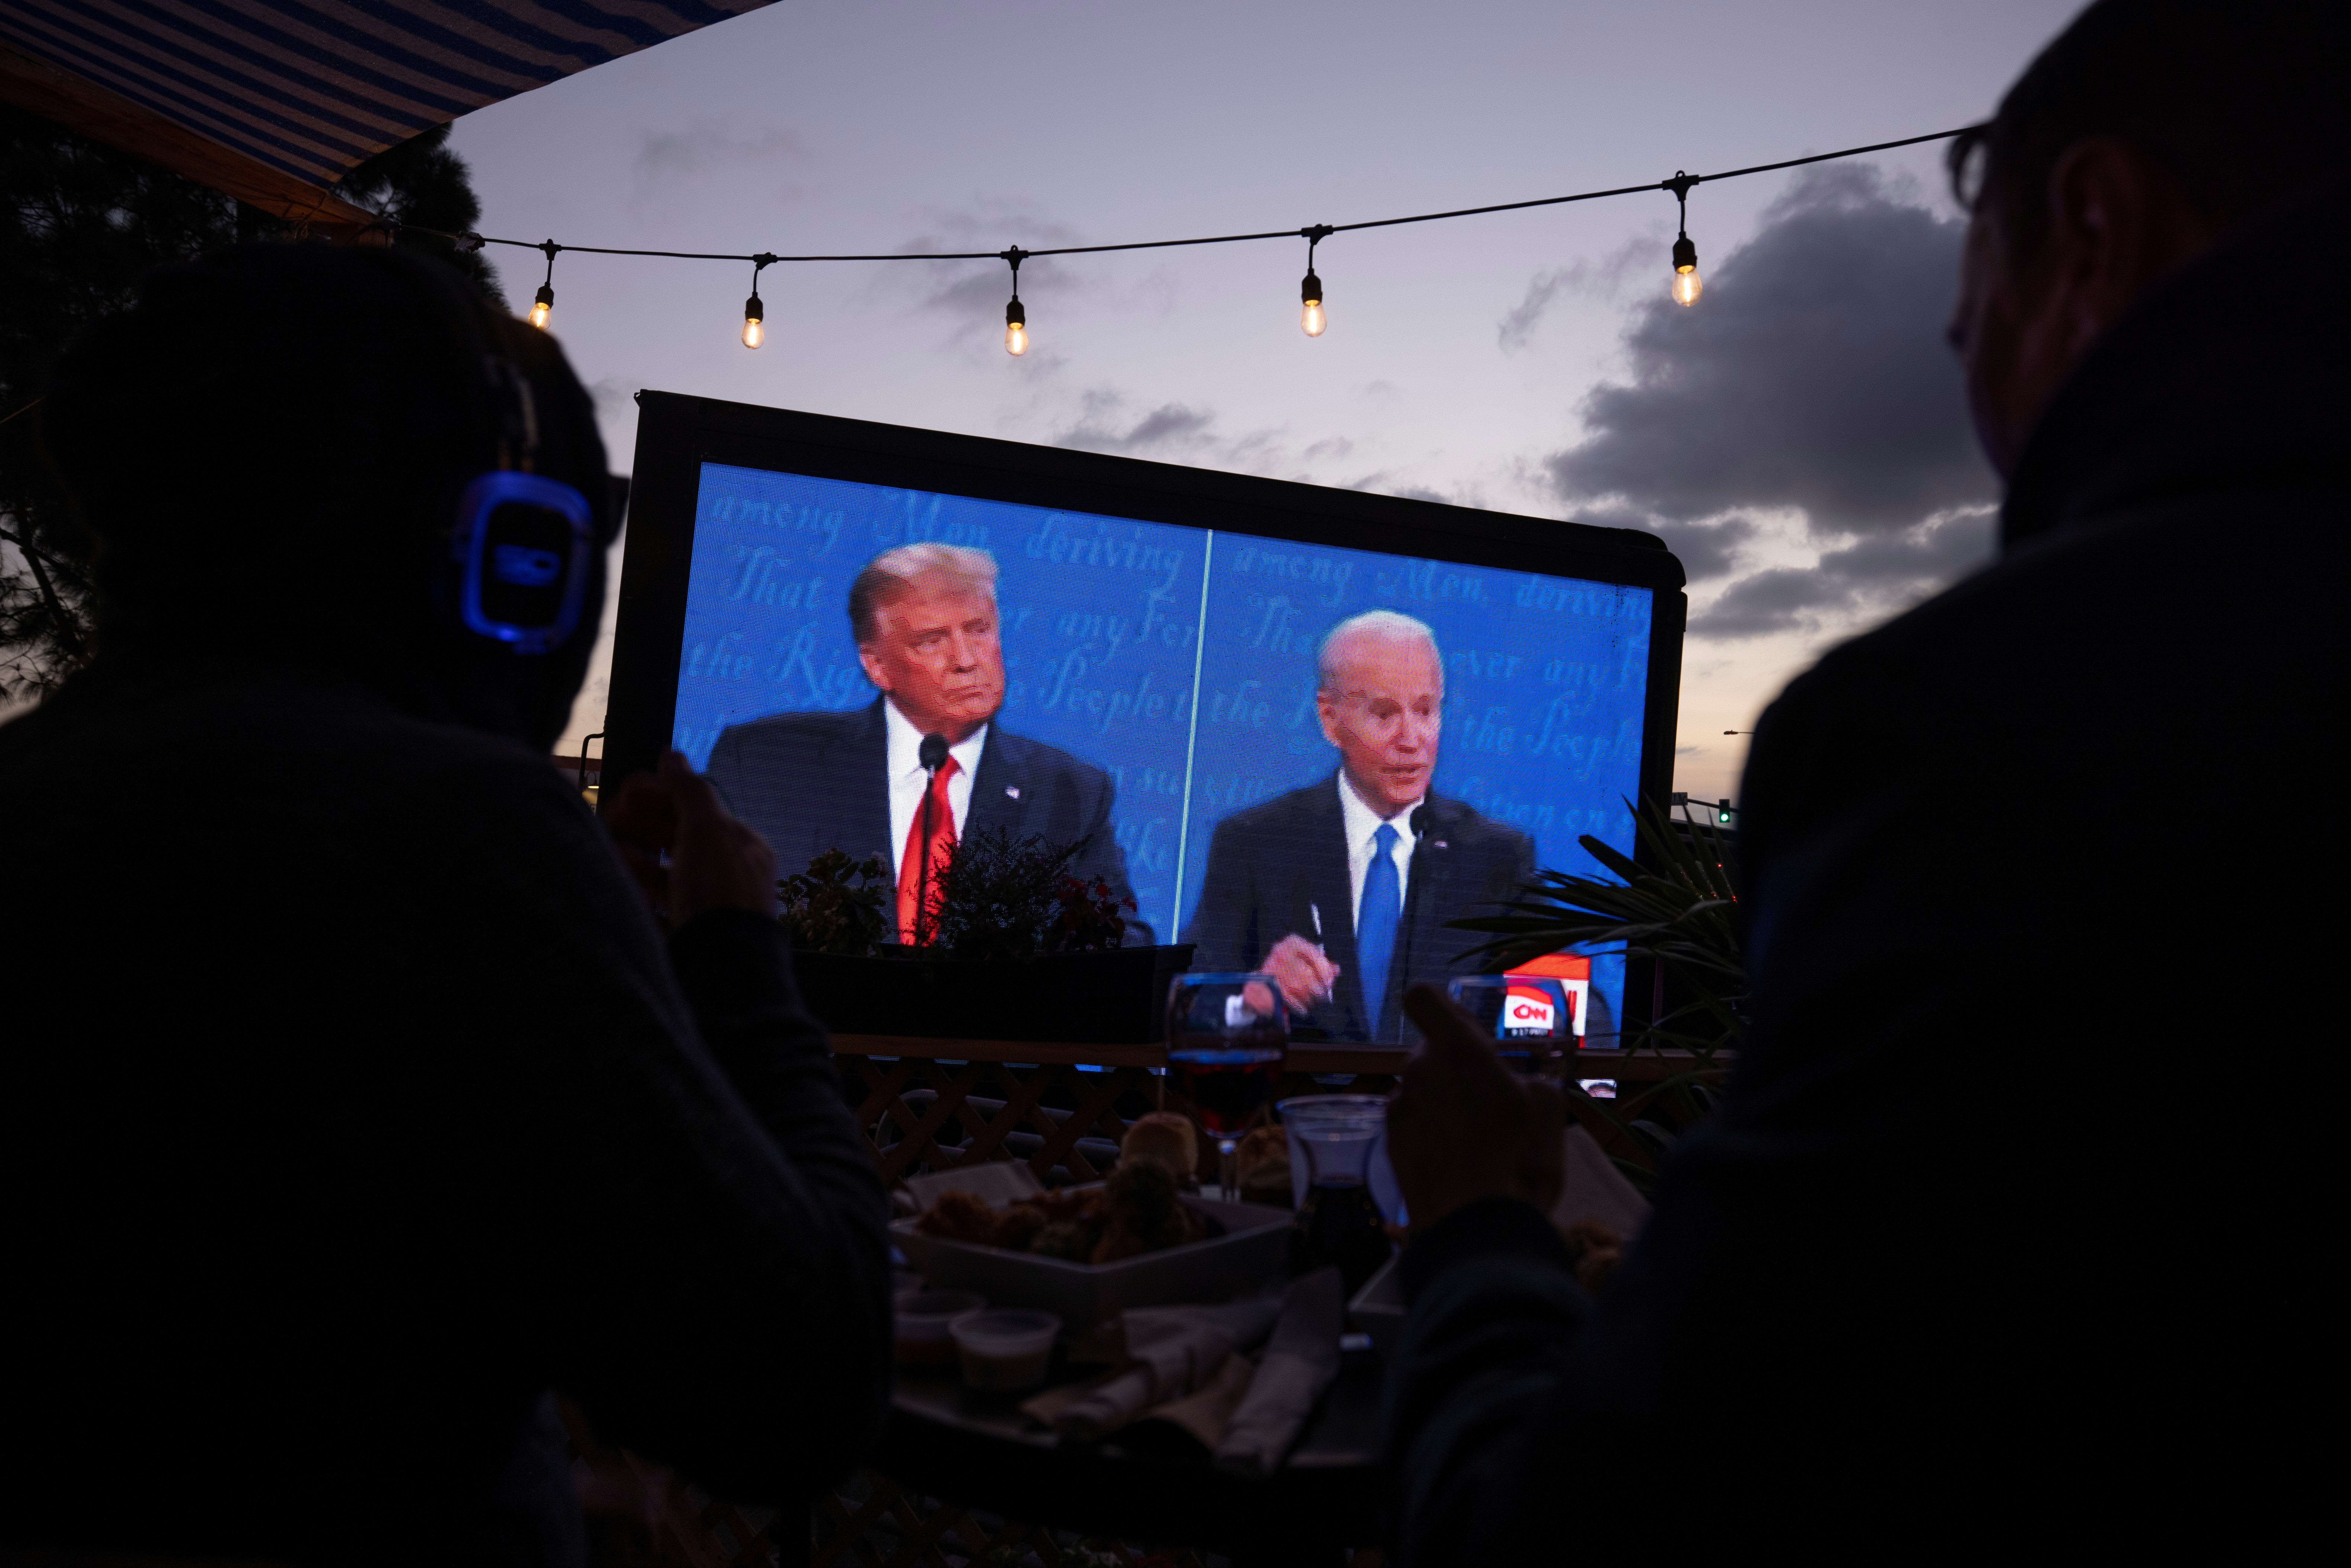 U.S. President Donald Trump and  Democratic presidential candidate Joe Biden's presidential debate is broadcast and watched at a tavern in San Diego